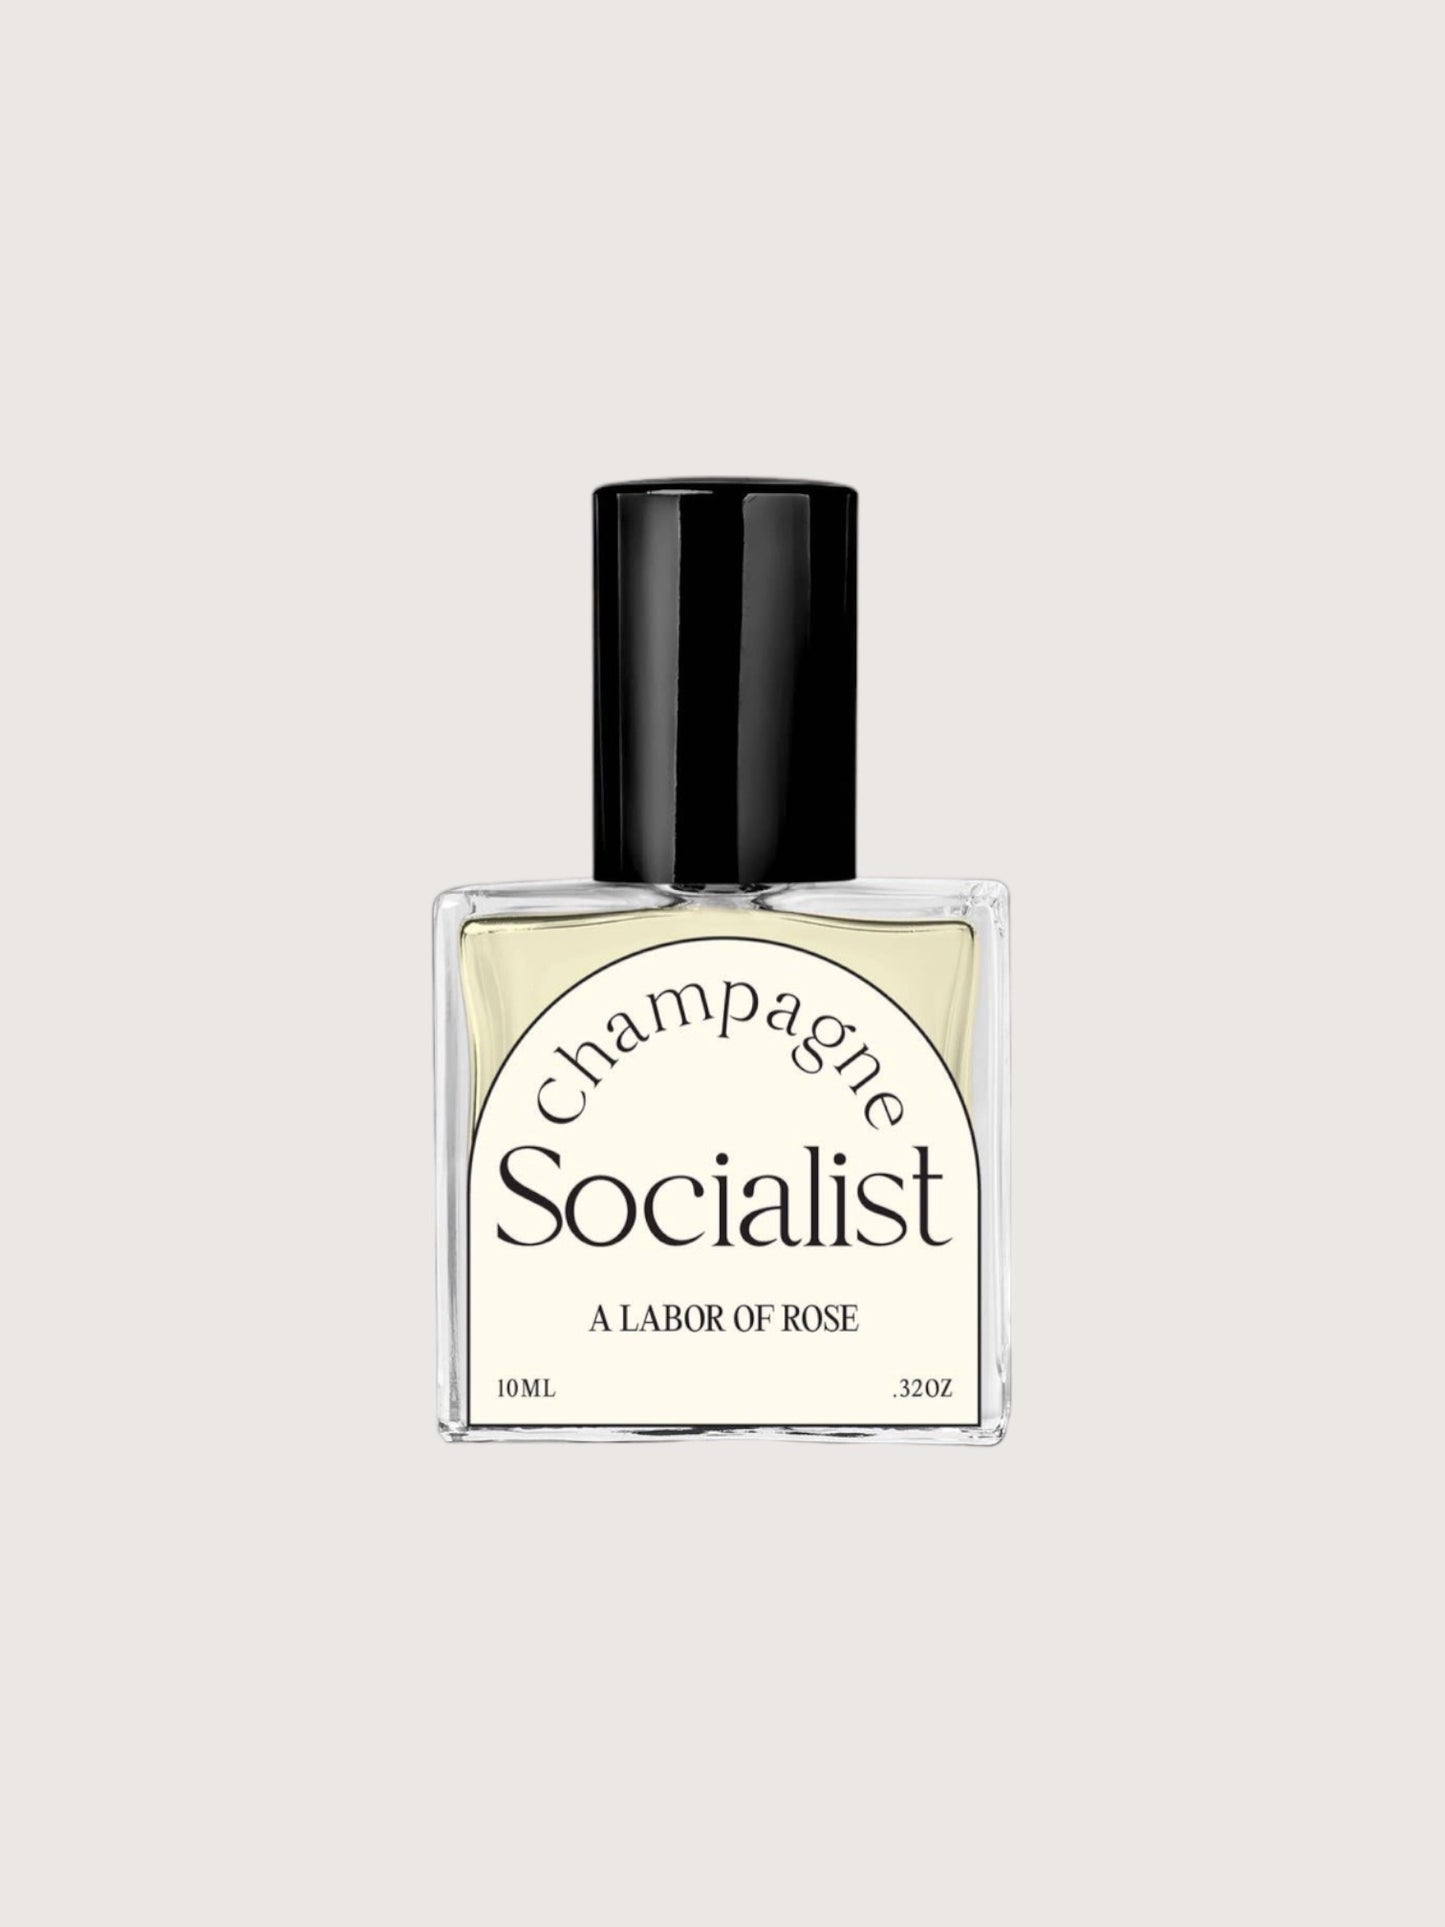 Champagne Socialist Perfume | A Labor of Rose